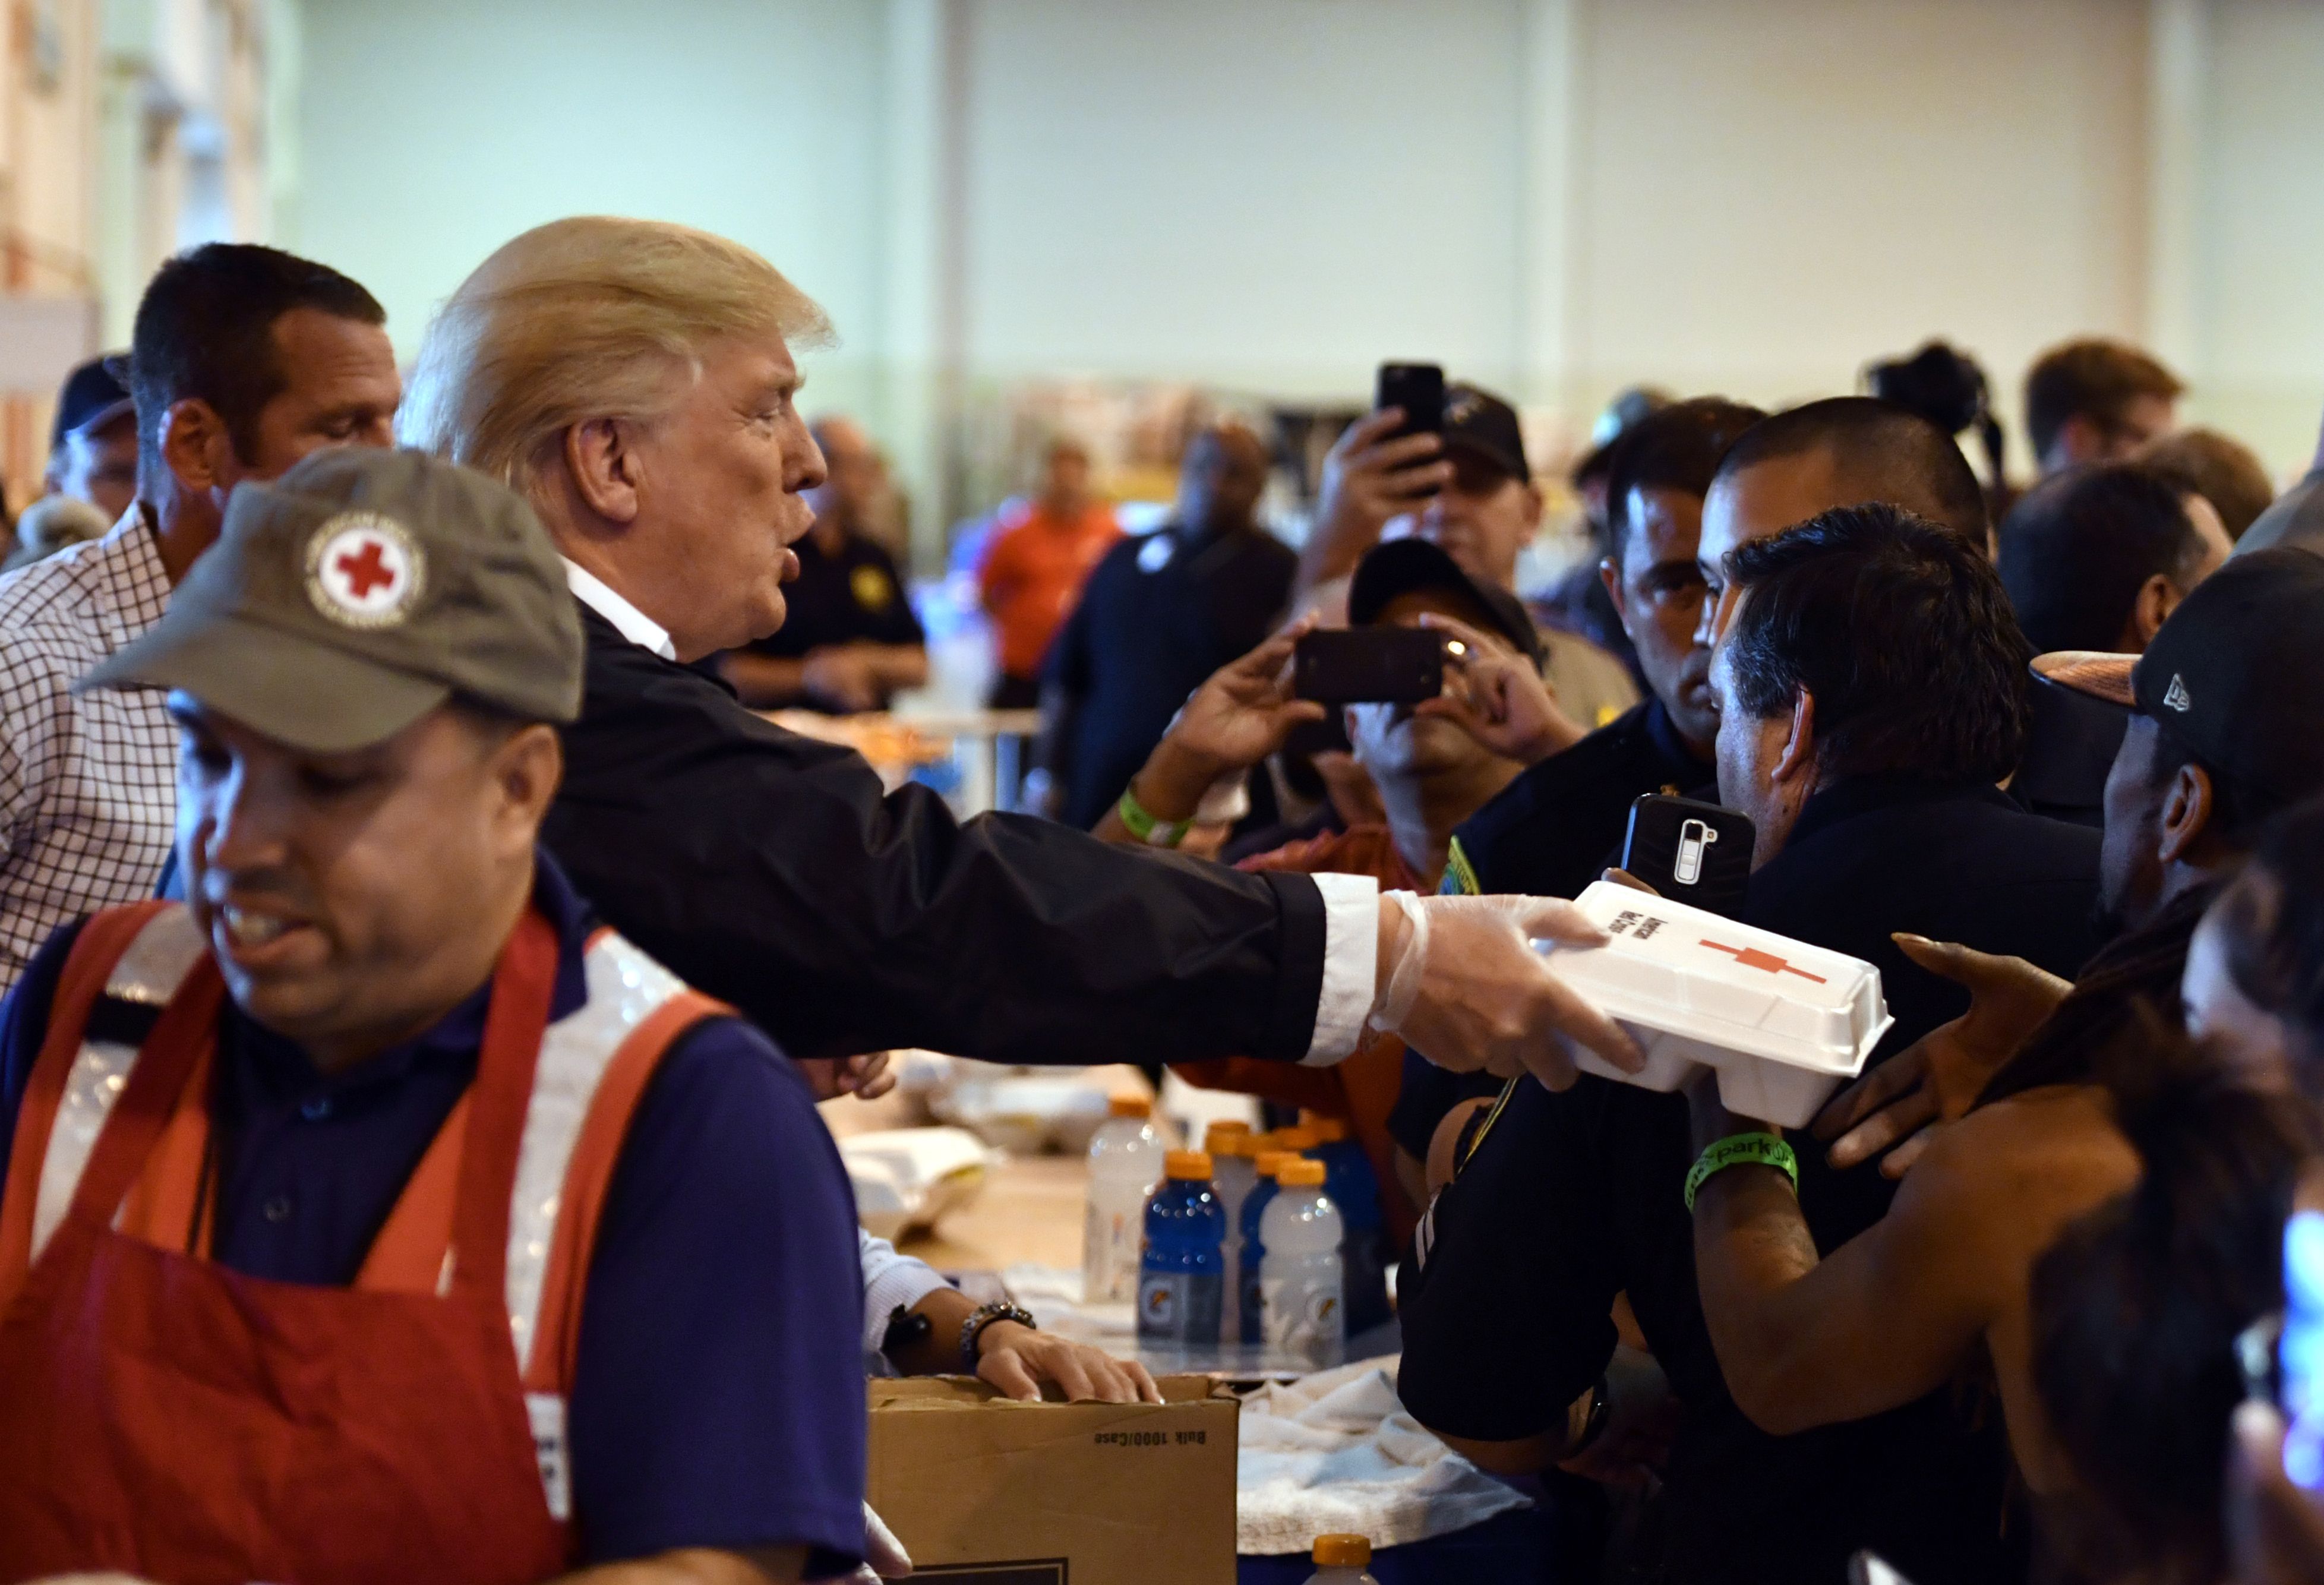 US President Donald Trump serves food to Hurricane Harvey victims at NRG Center in Houston on September 2, 2017. NICHOLAS KAMM/AFP/Getty Images